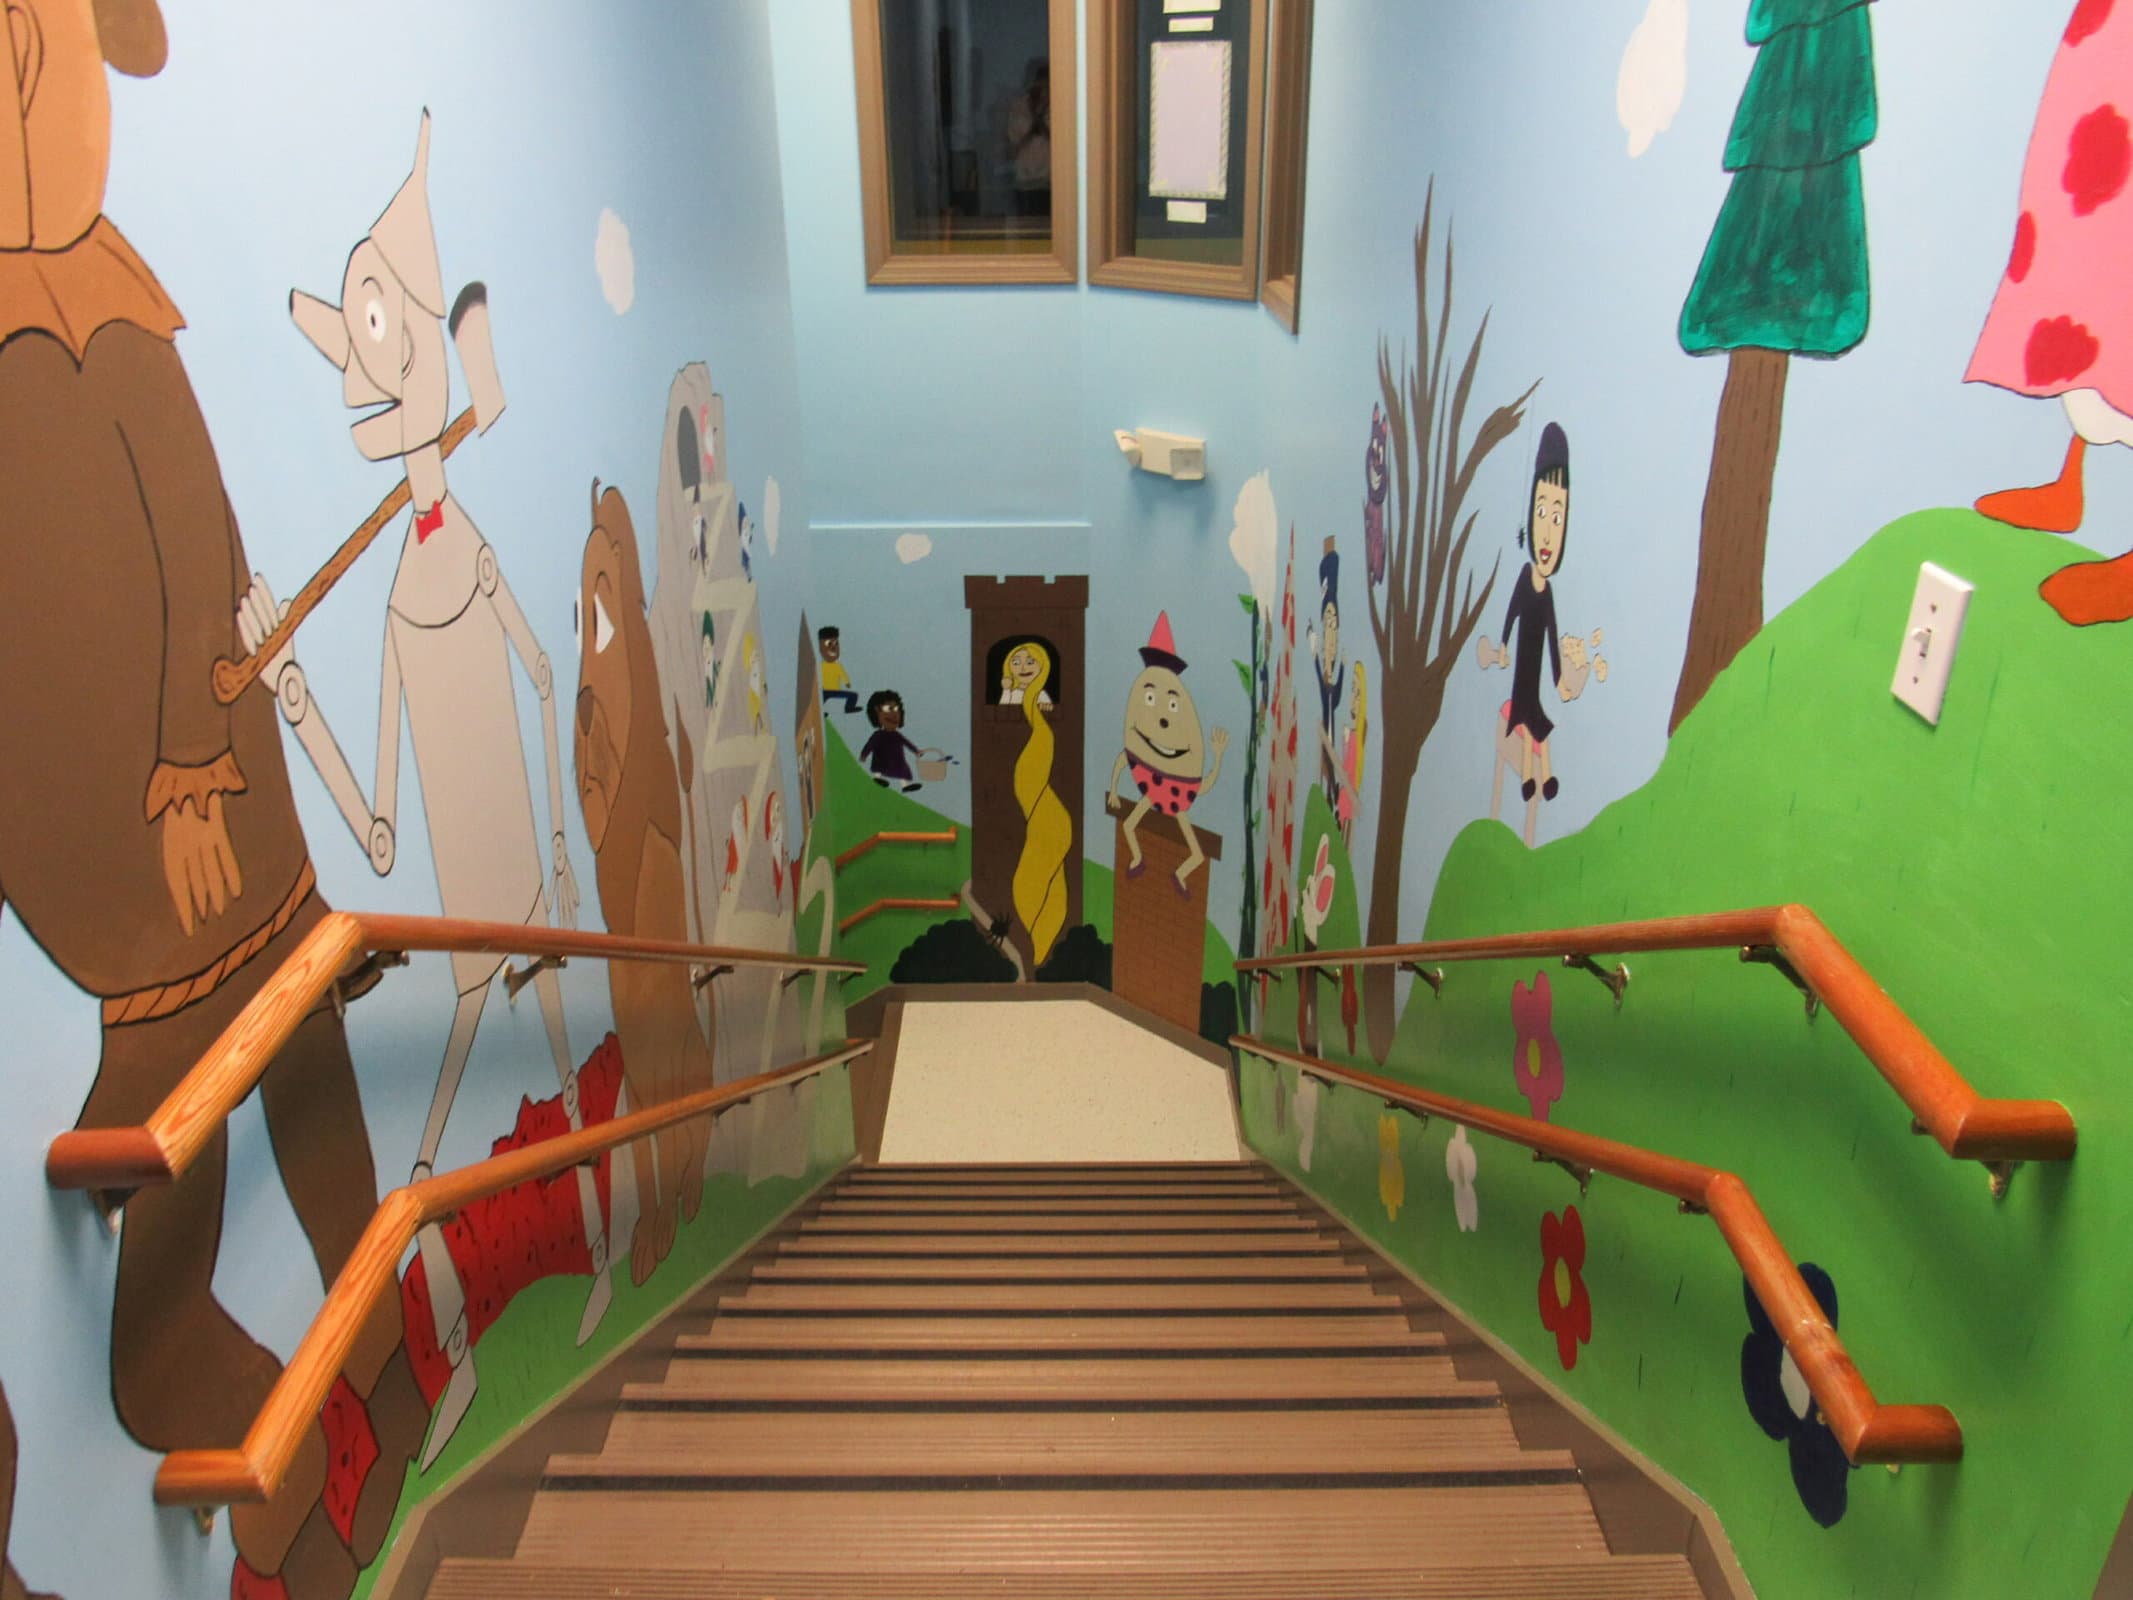 Marlborough resident paints childcare center’s stairwell for Eagle Scout project